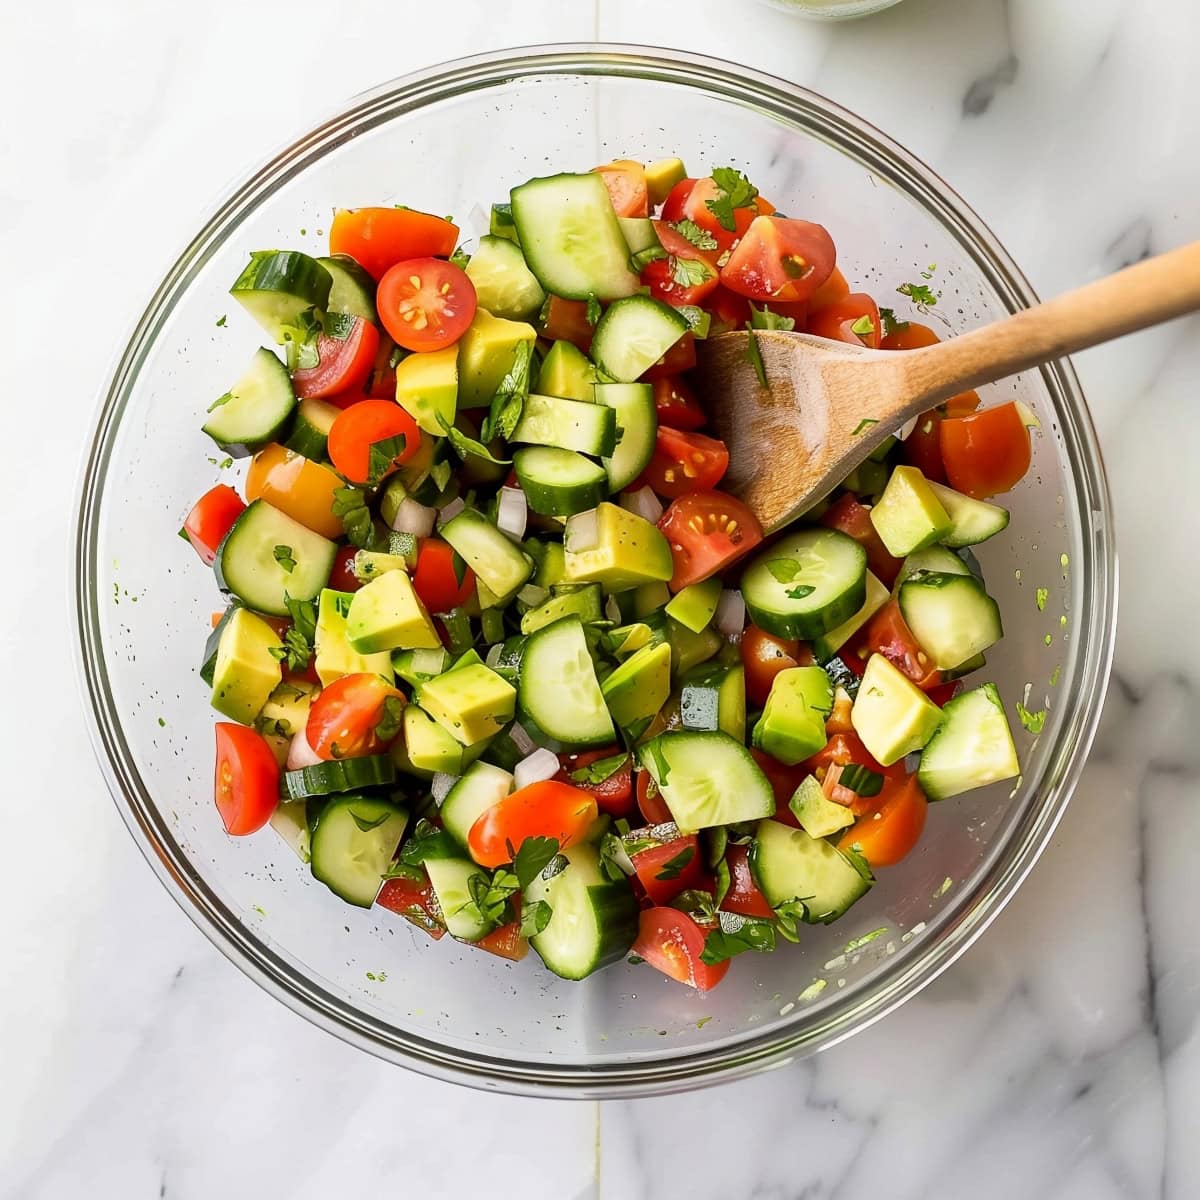 A glass bowl of avocadoes, tomatoes, cherry tomatoes and cilantro.